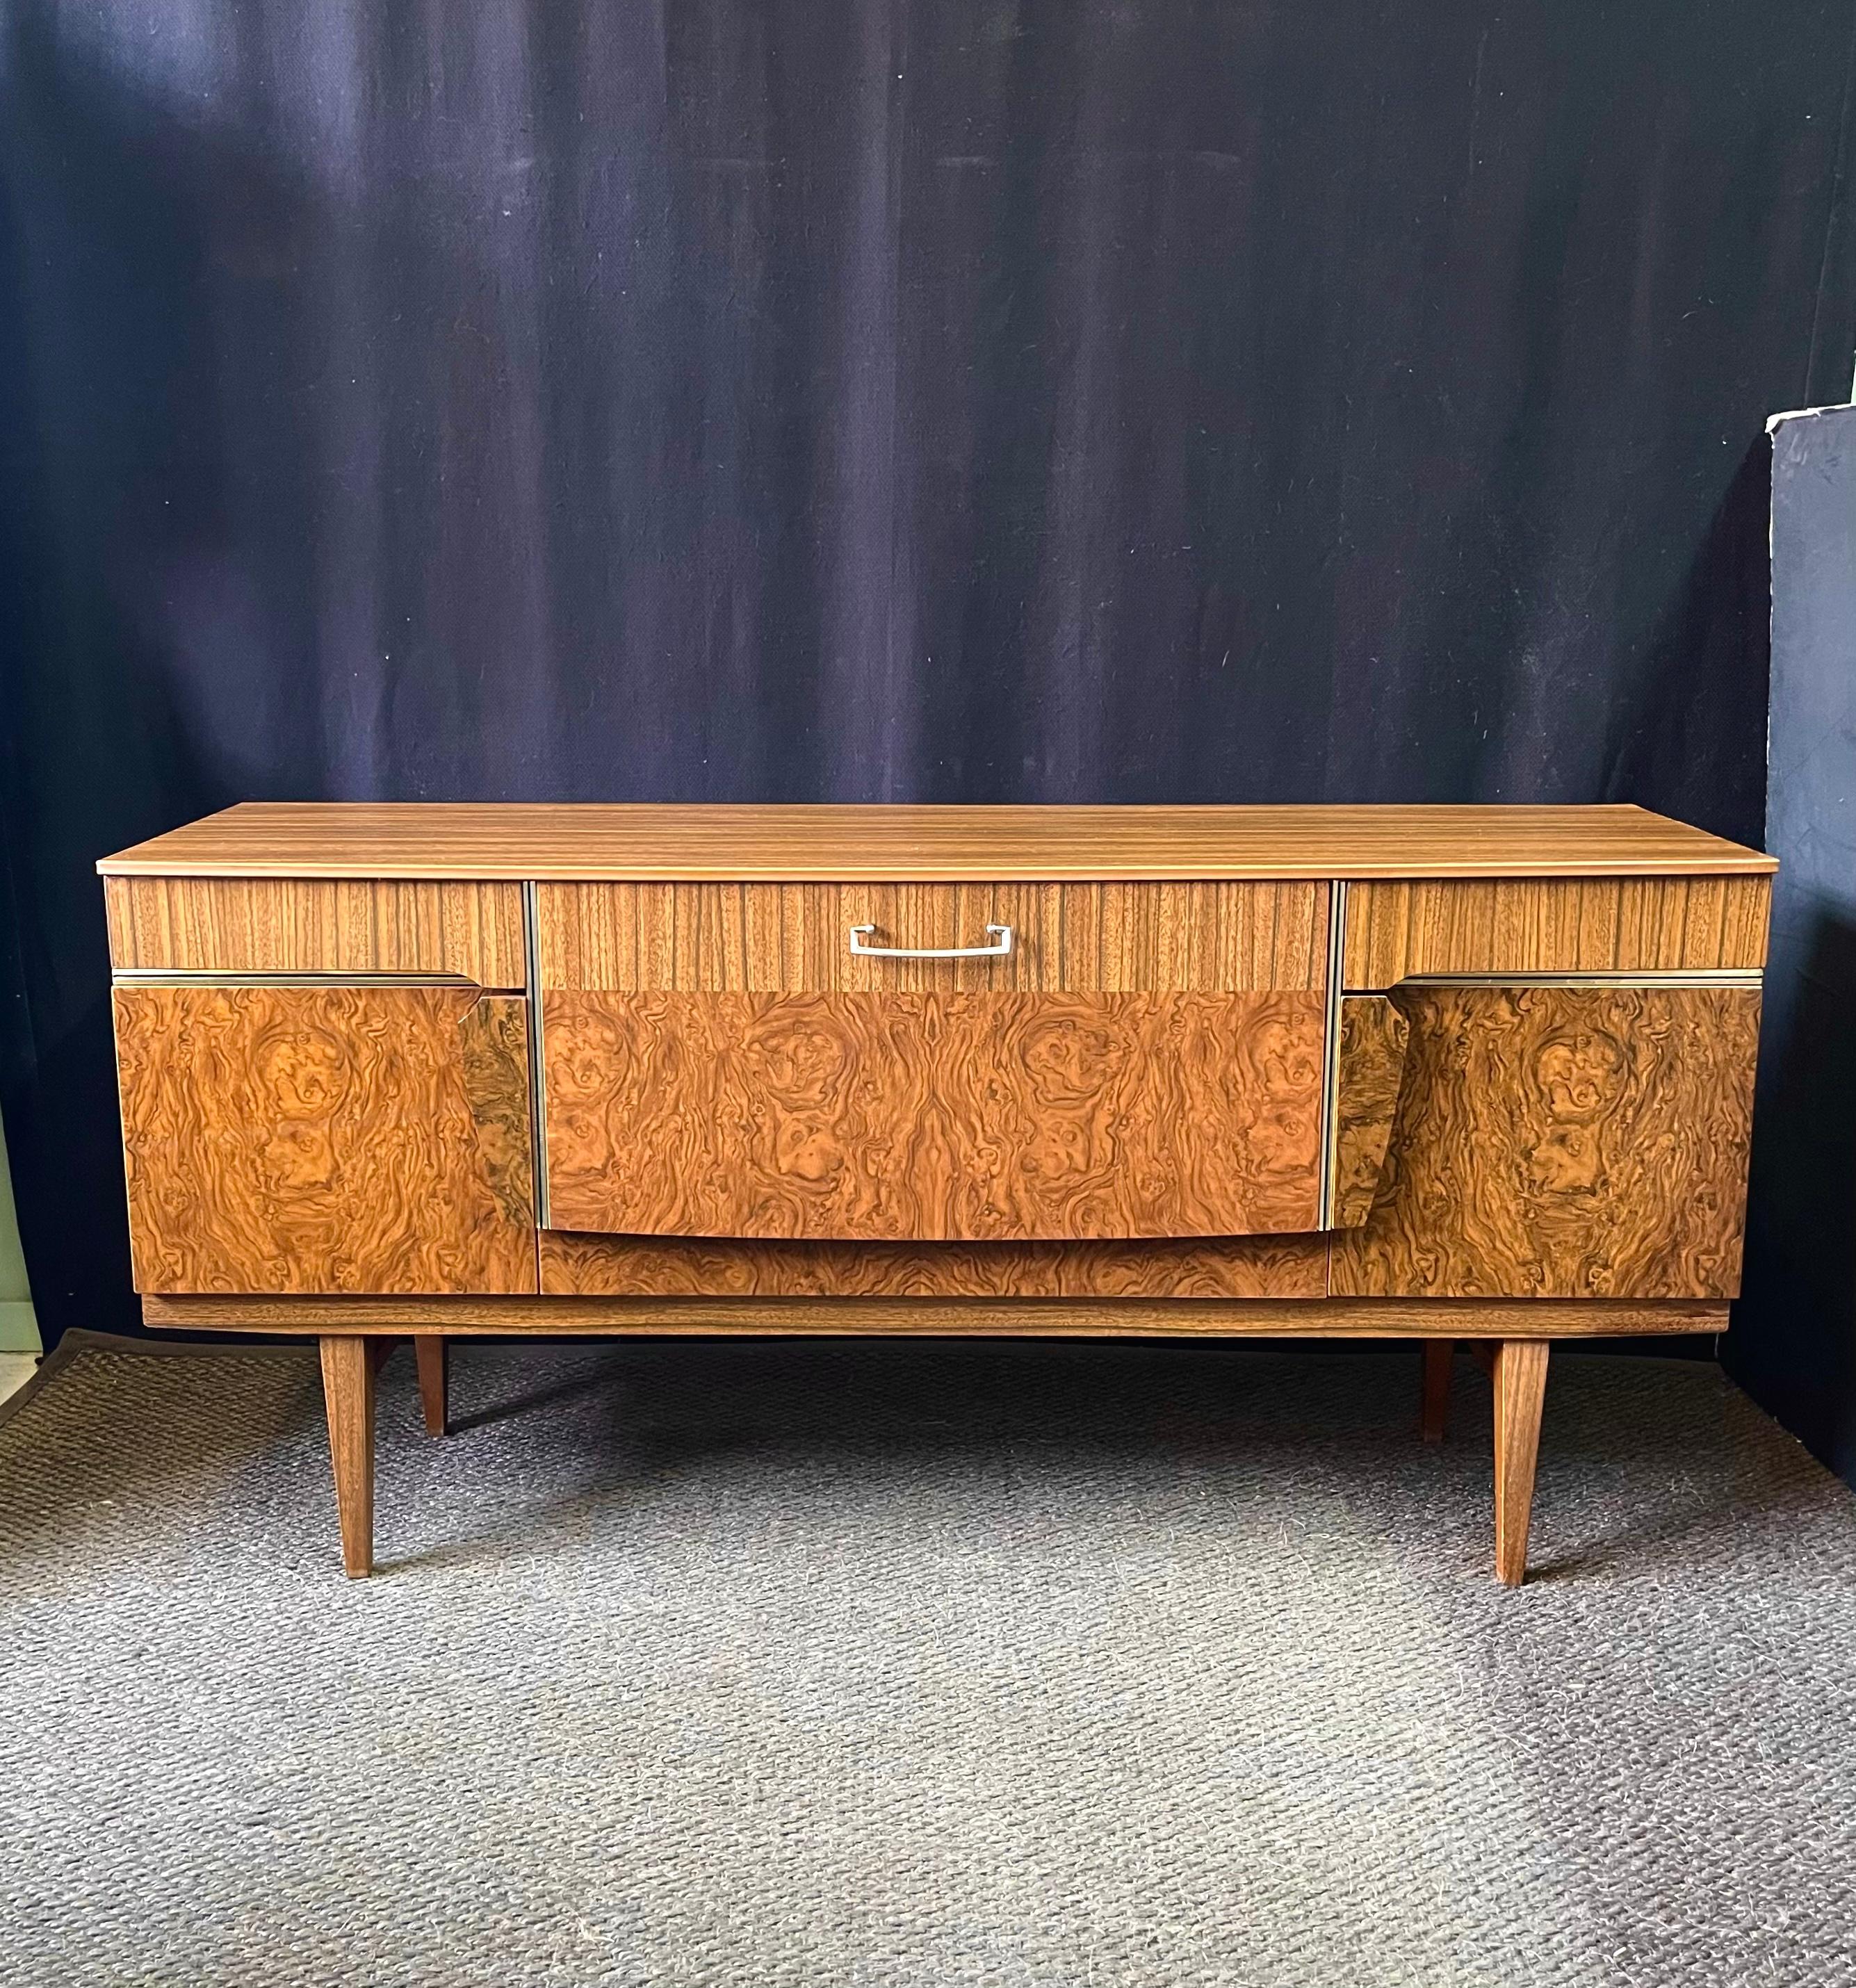 This vintage mid-century credenza was designed and manufactured by 'beautility furniture' in England during the 1950s. A posh, stylishly designed credenza, the burl wood melamine veneered cabinet rests on tapered legs. The case consists of two outer